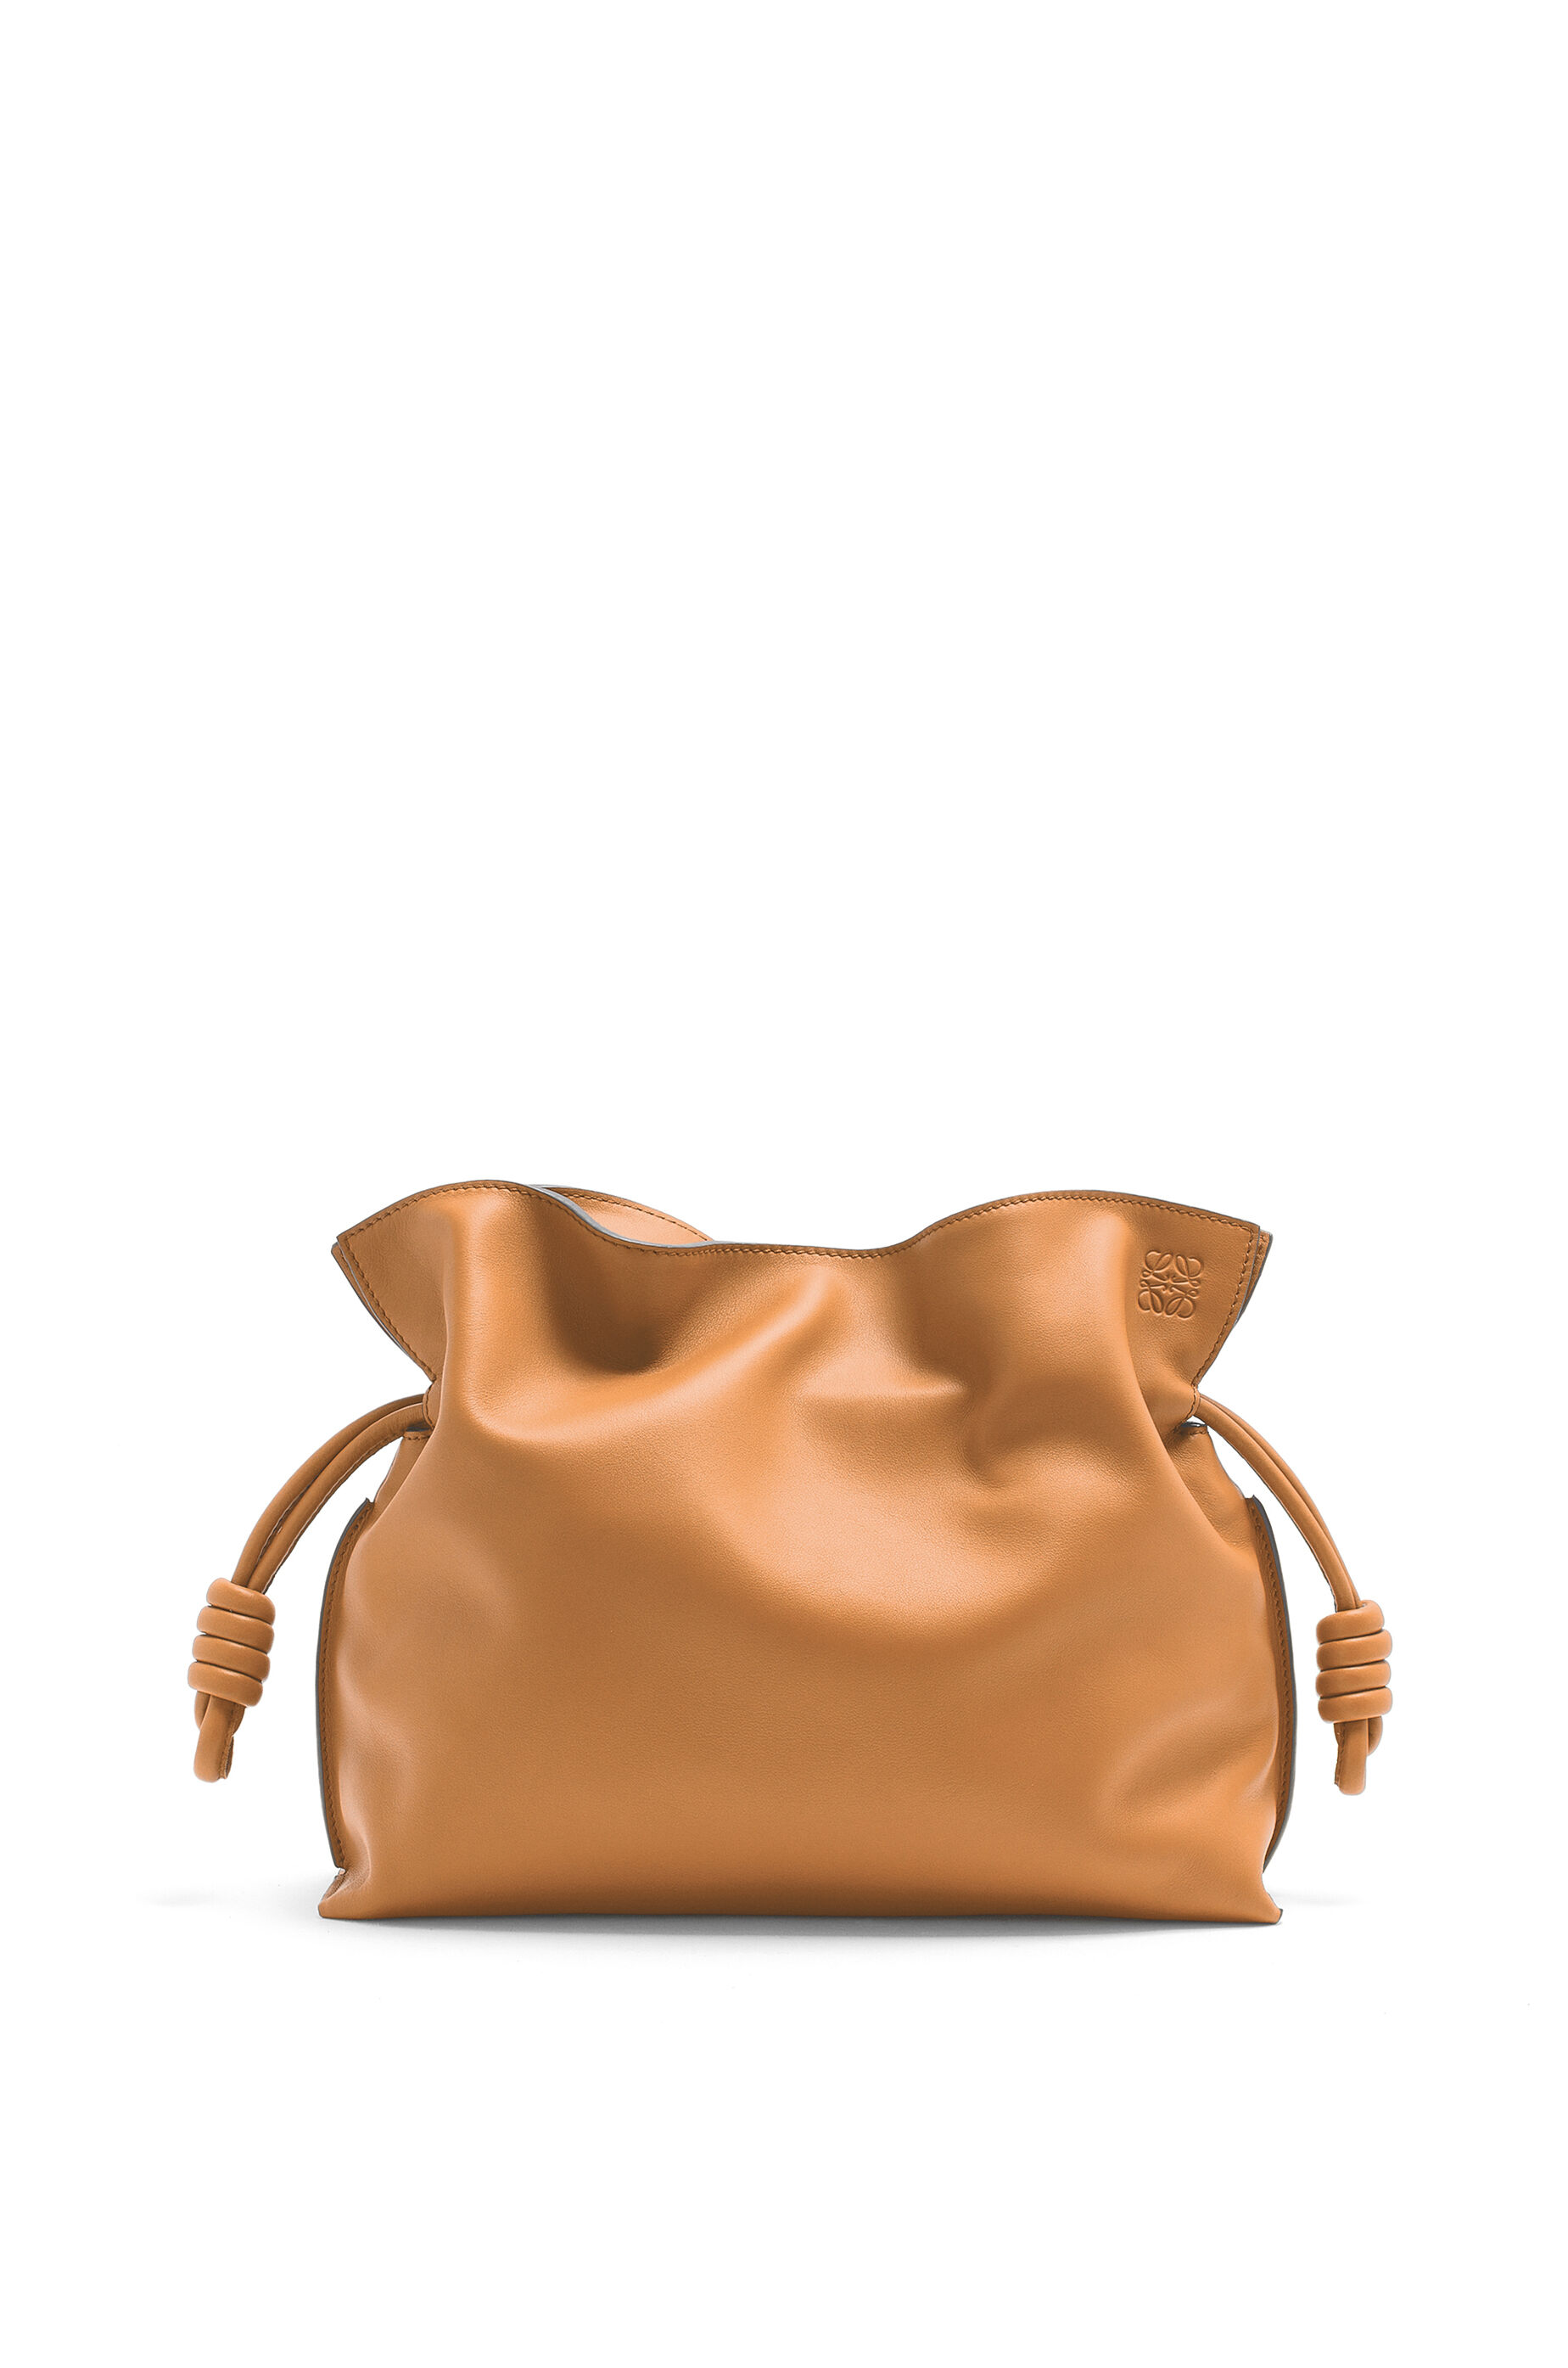 Luxury Flamenco Bags for women | See our Collection | Loewe - LOEWE